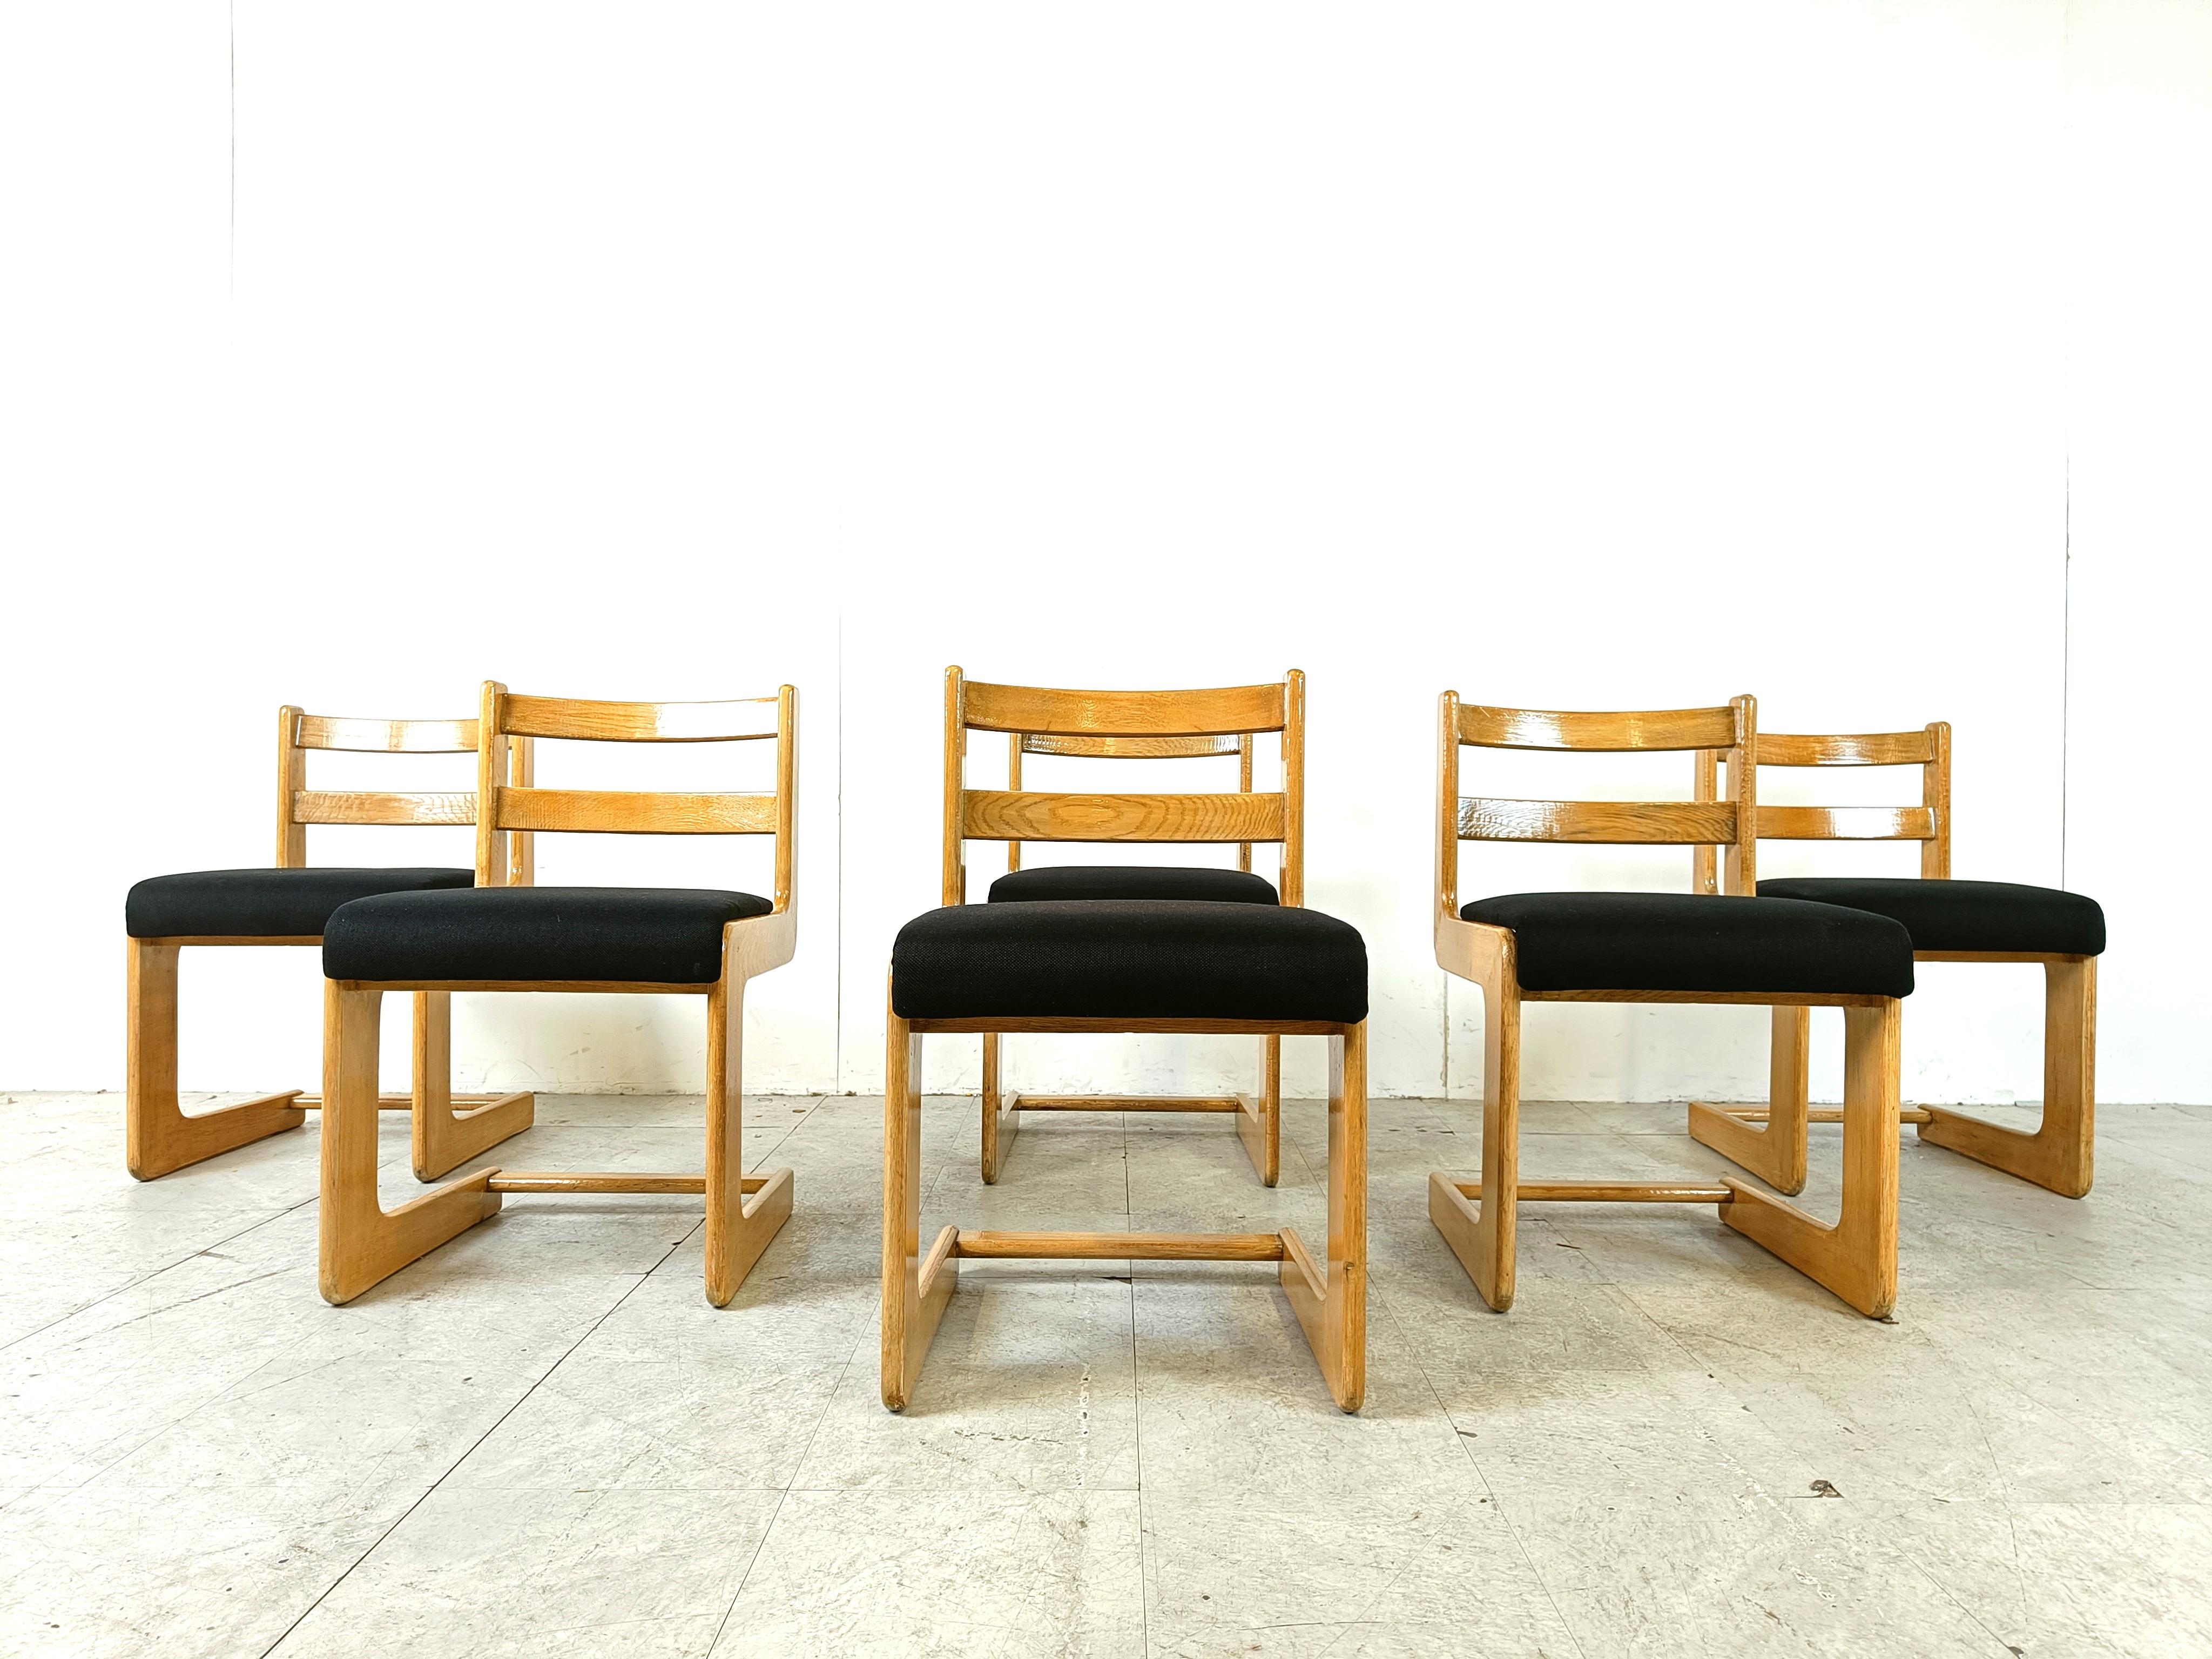 German Vintage cantilever chairs by Casala, 1970s For Sale